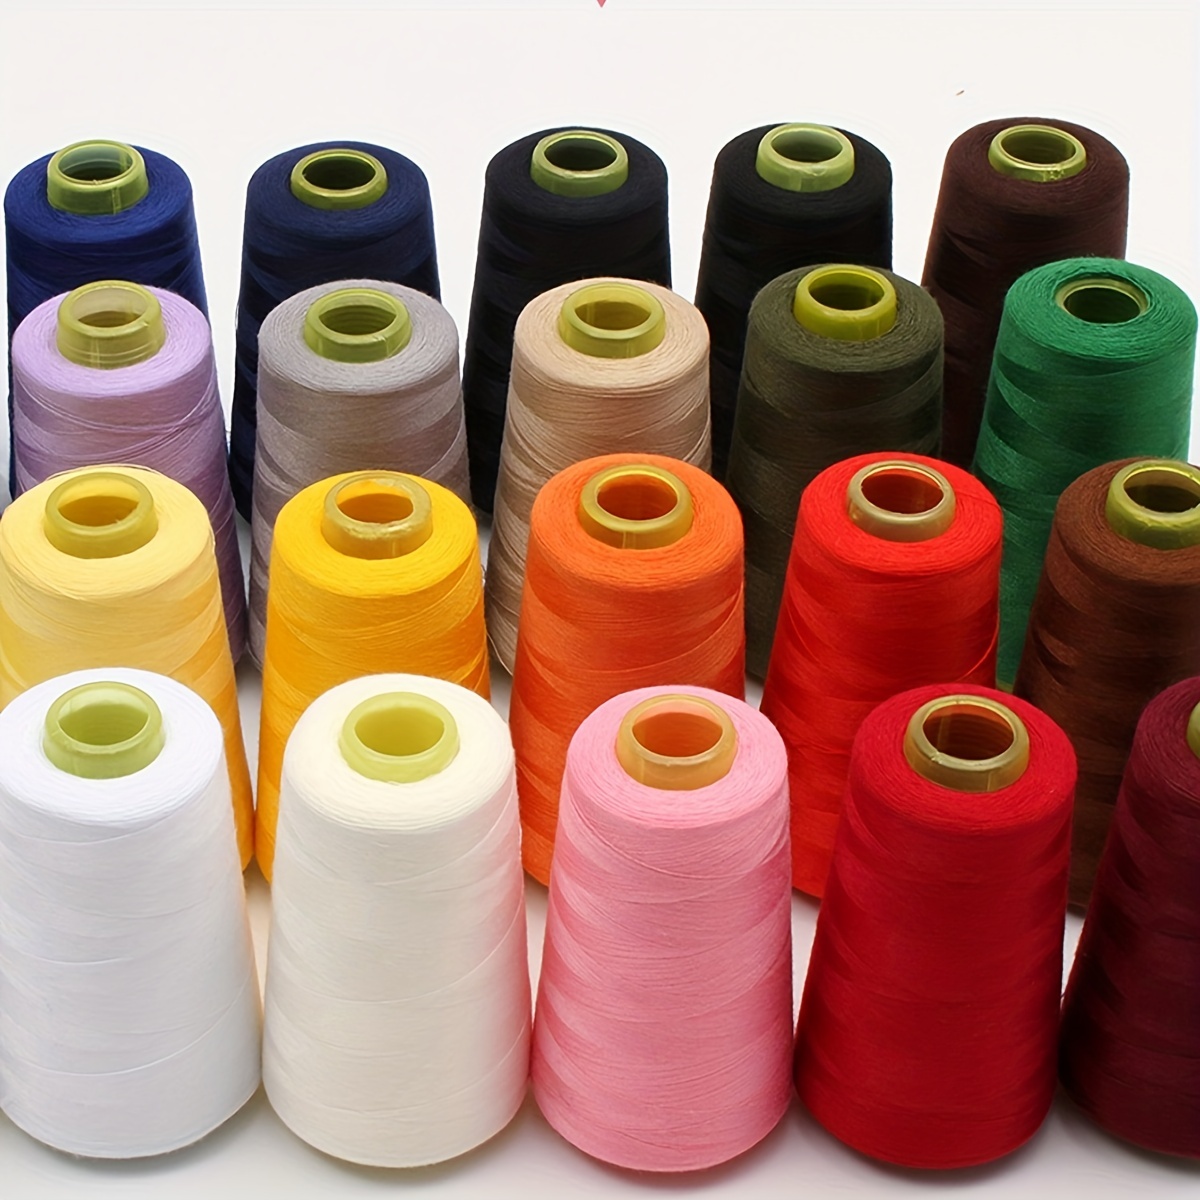 

1pc Large Roll Pagoda Sewing Machine Thread 3000 Yards For Home Hand Sewing Polyester Black Thread Household Color Sewing Thread Sewing Machine Thread